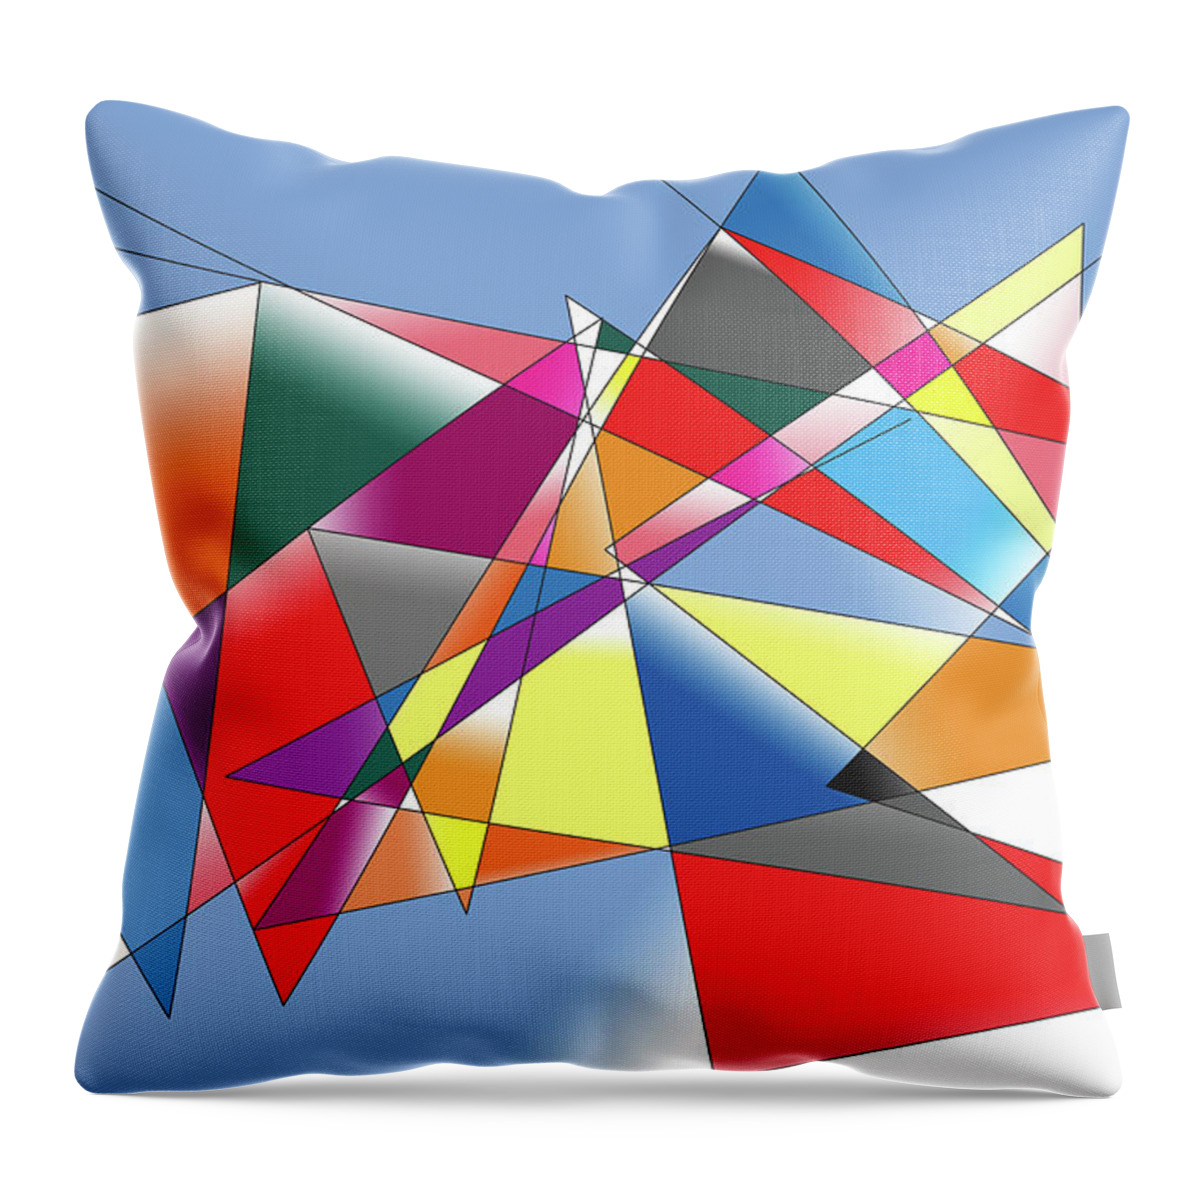 Cubist Throw Pillow featuring the digital art Weather And Time, 2017 by Alex Caminker